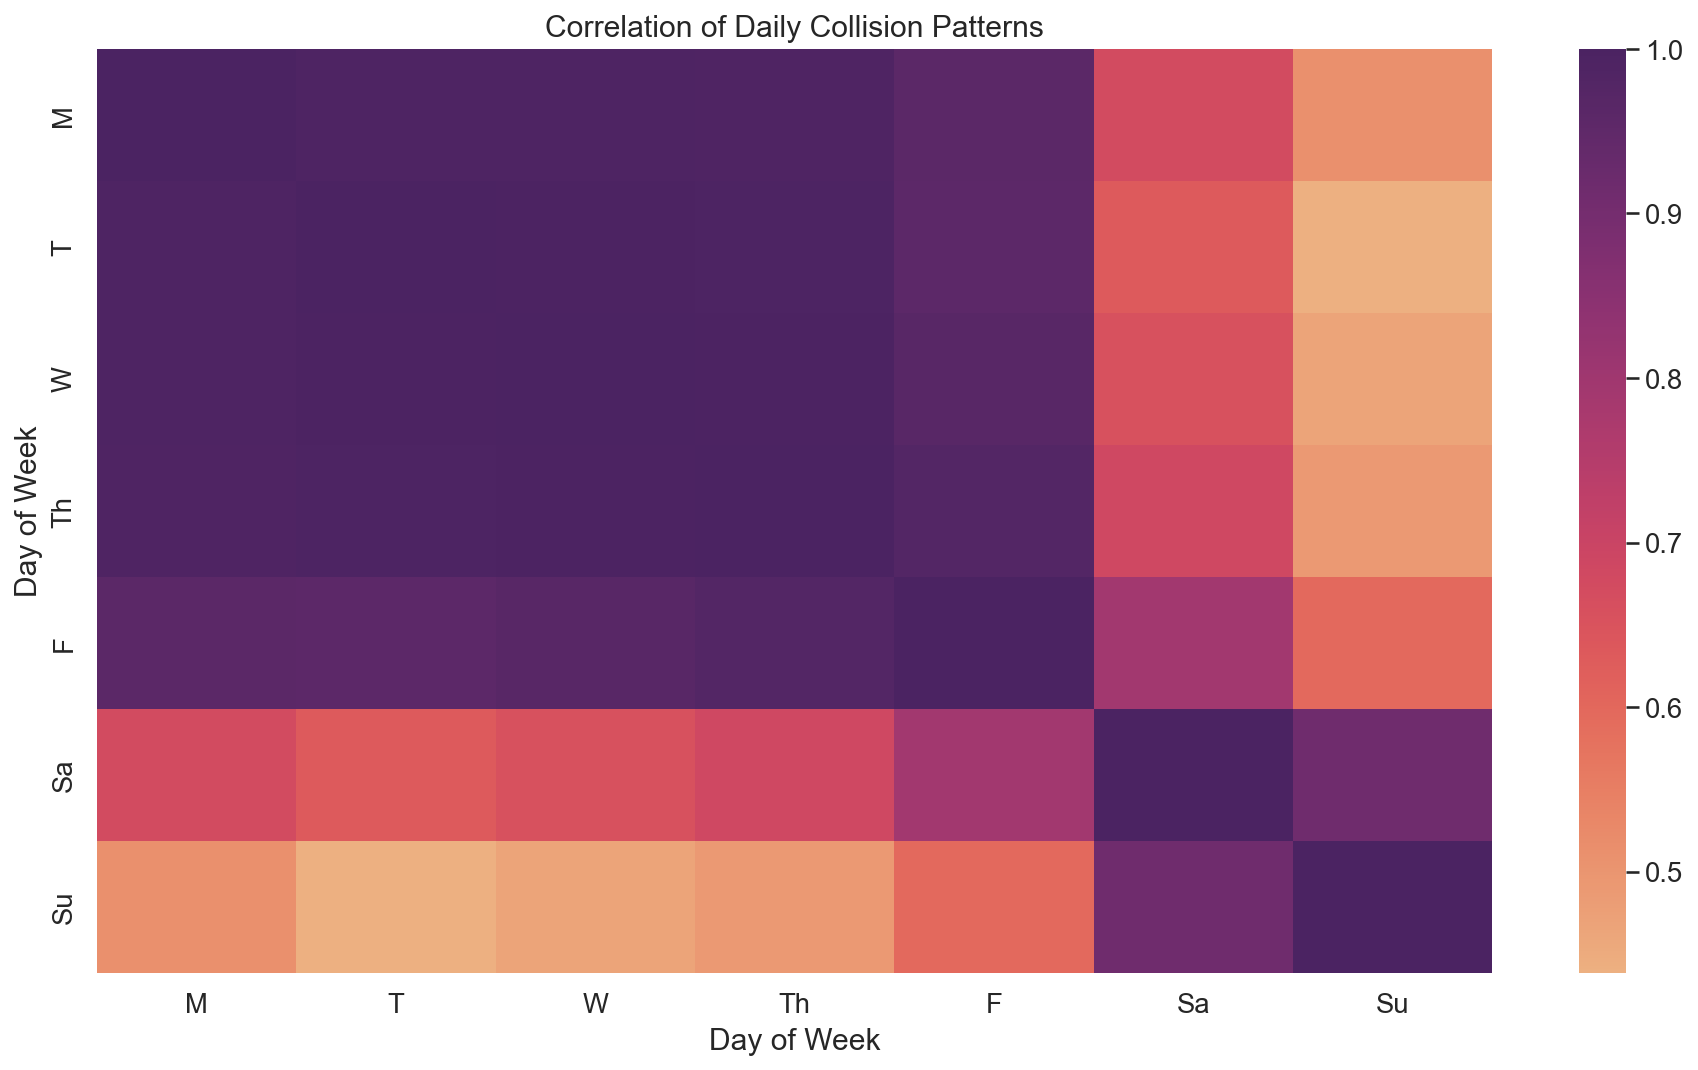 Traffic Collisions Correlations by Day